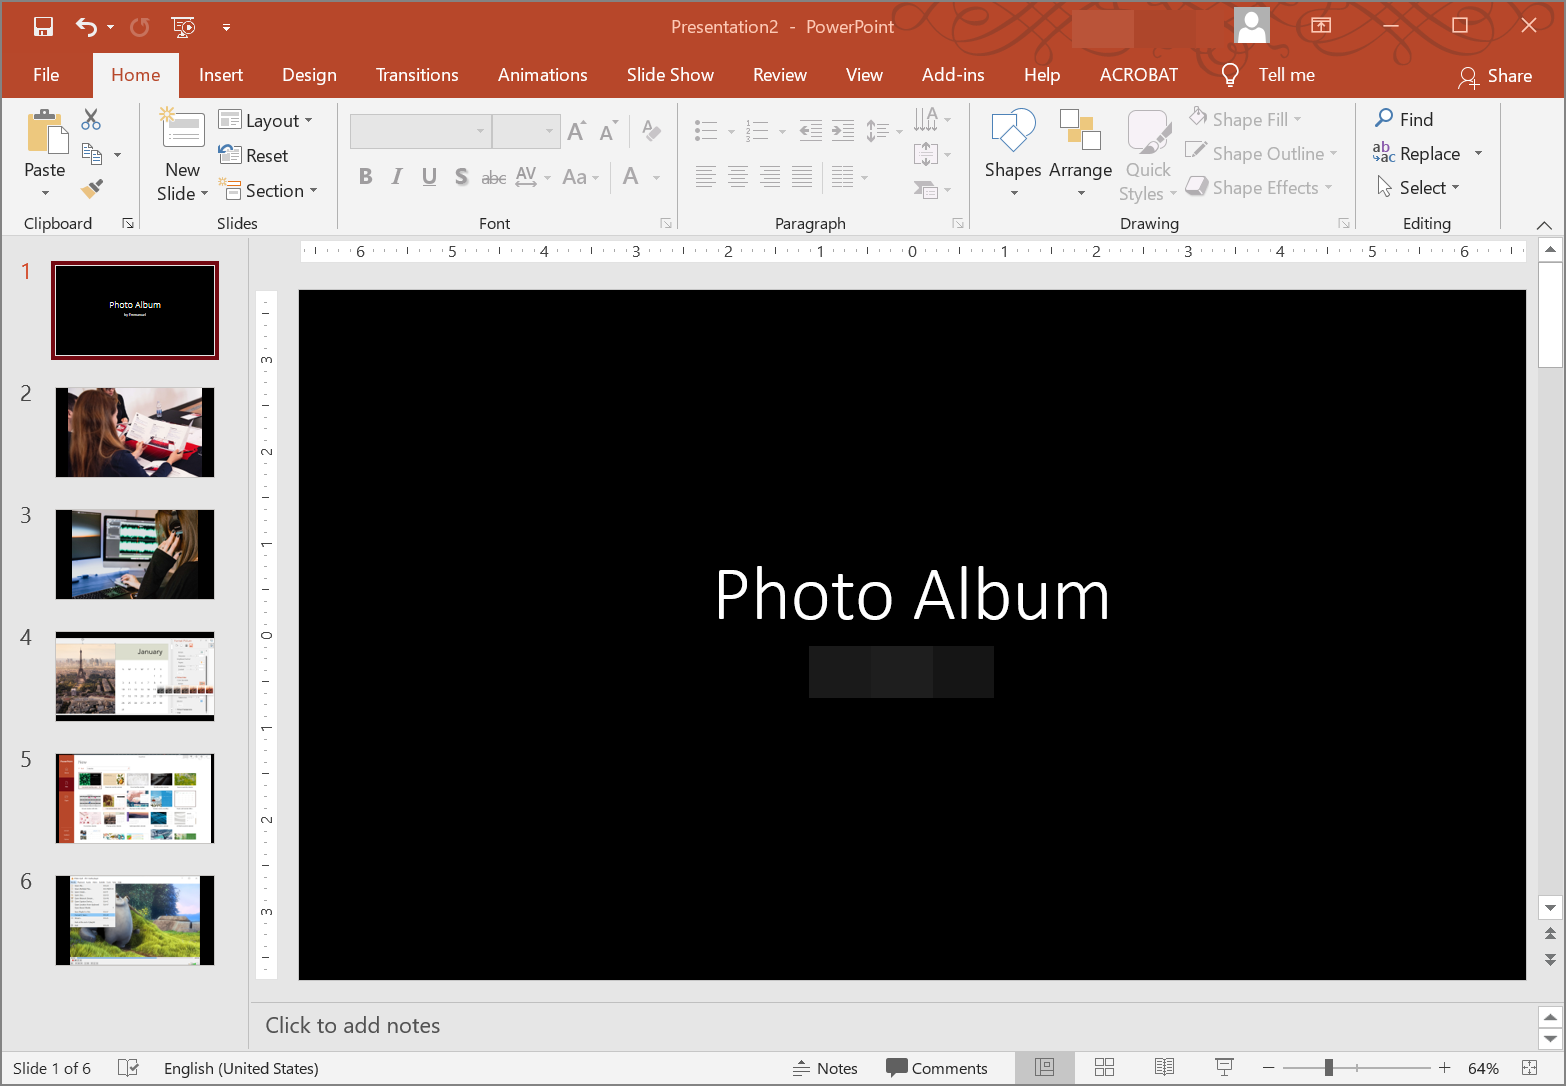 Images in a PowerPoint presentation